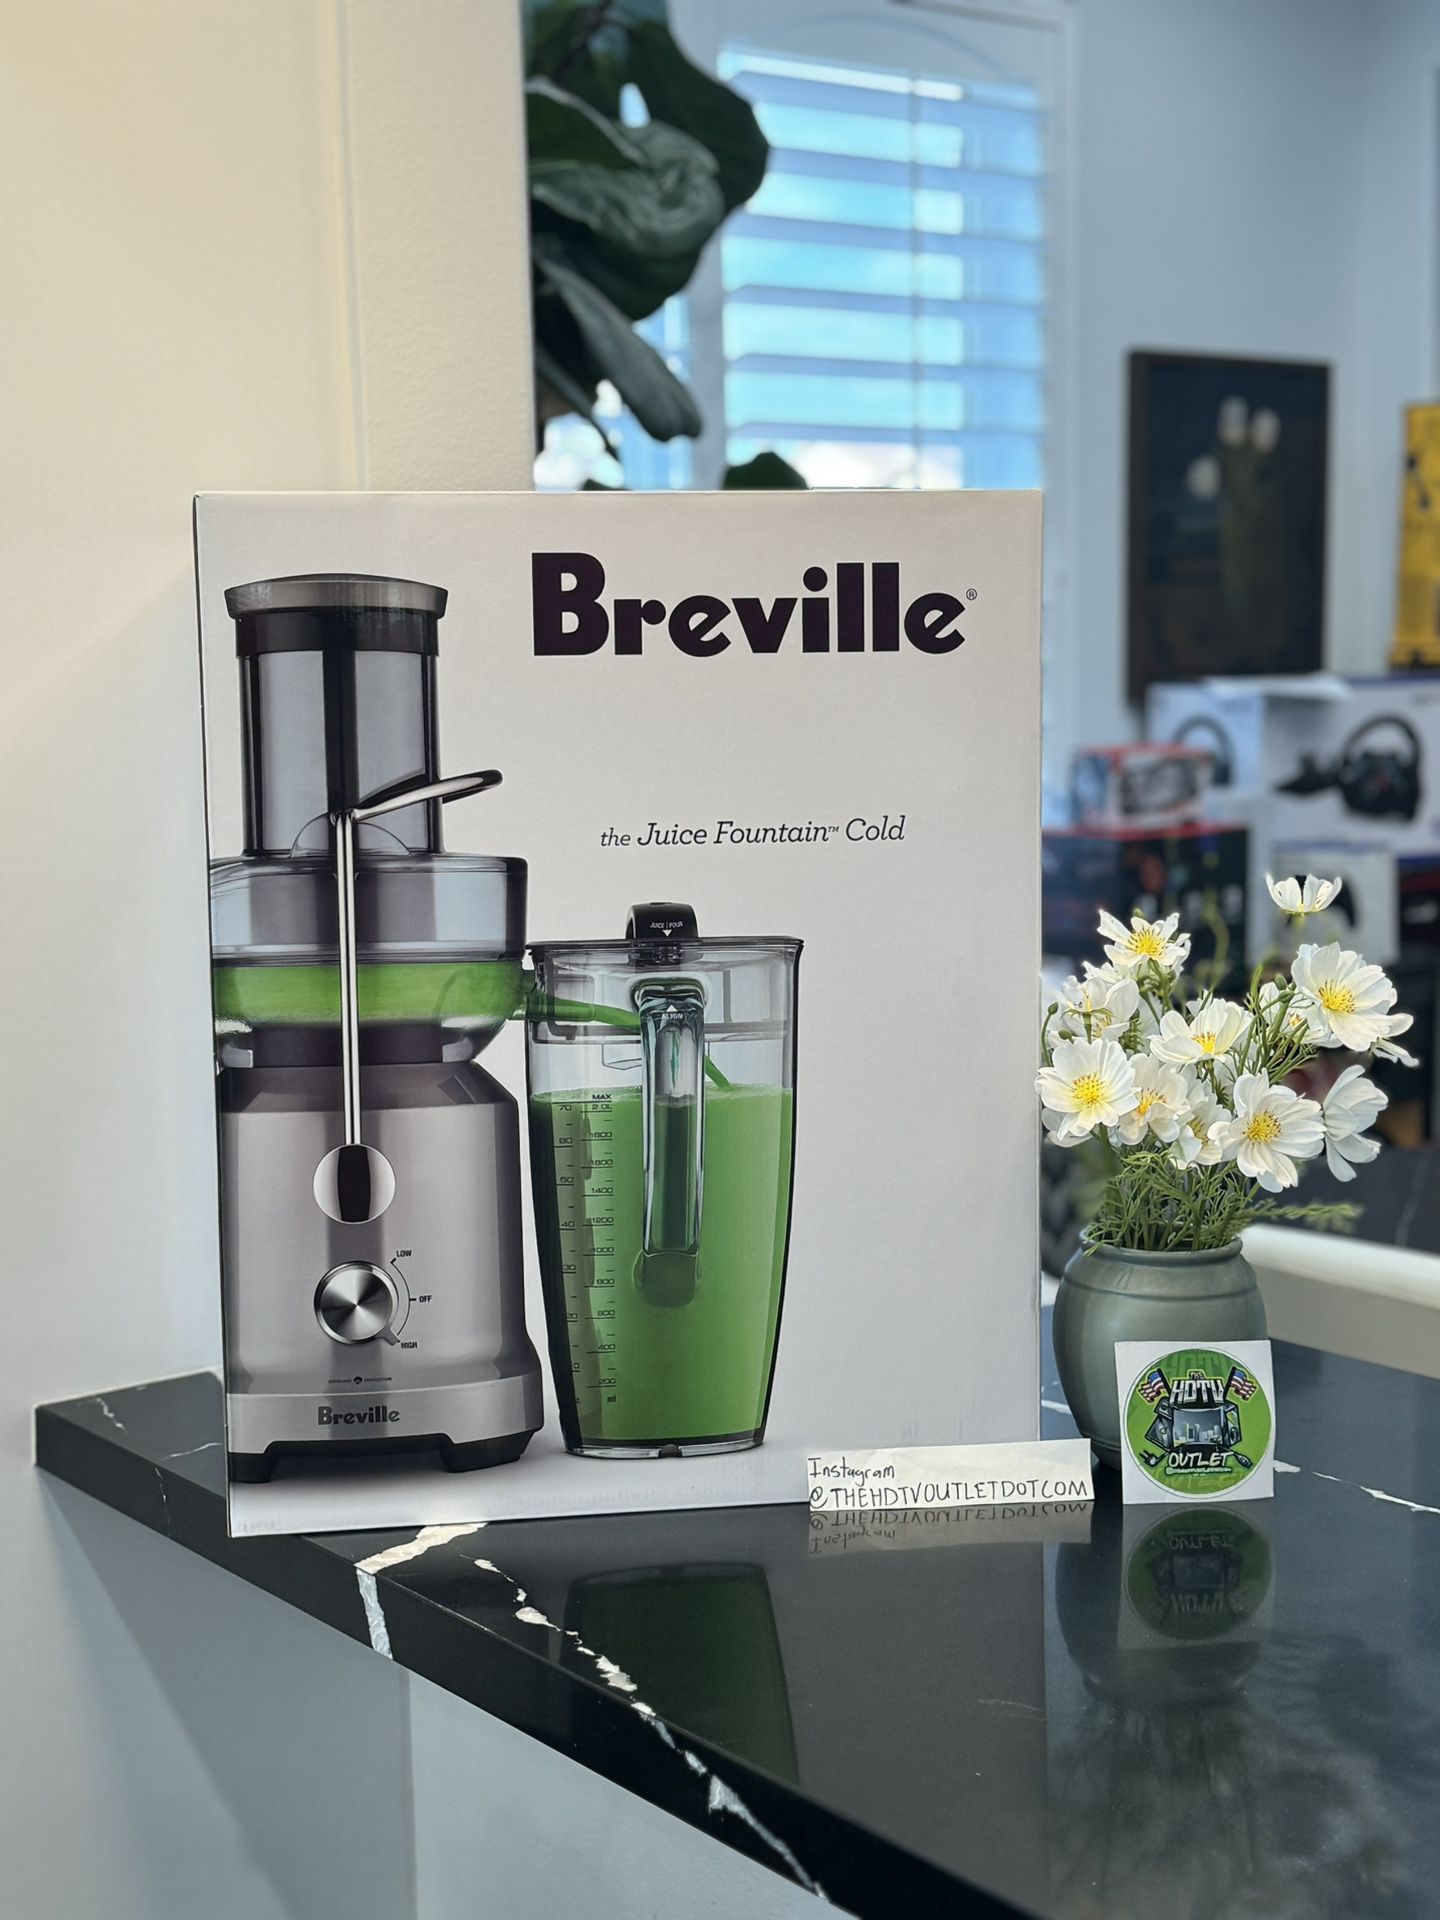 Breville Juice Fountain Cold Eletric Juicer 